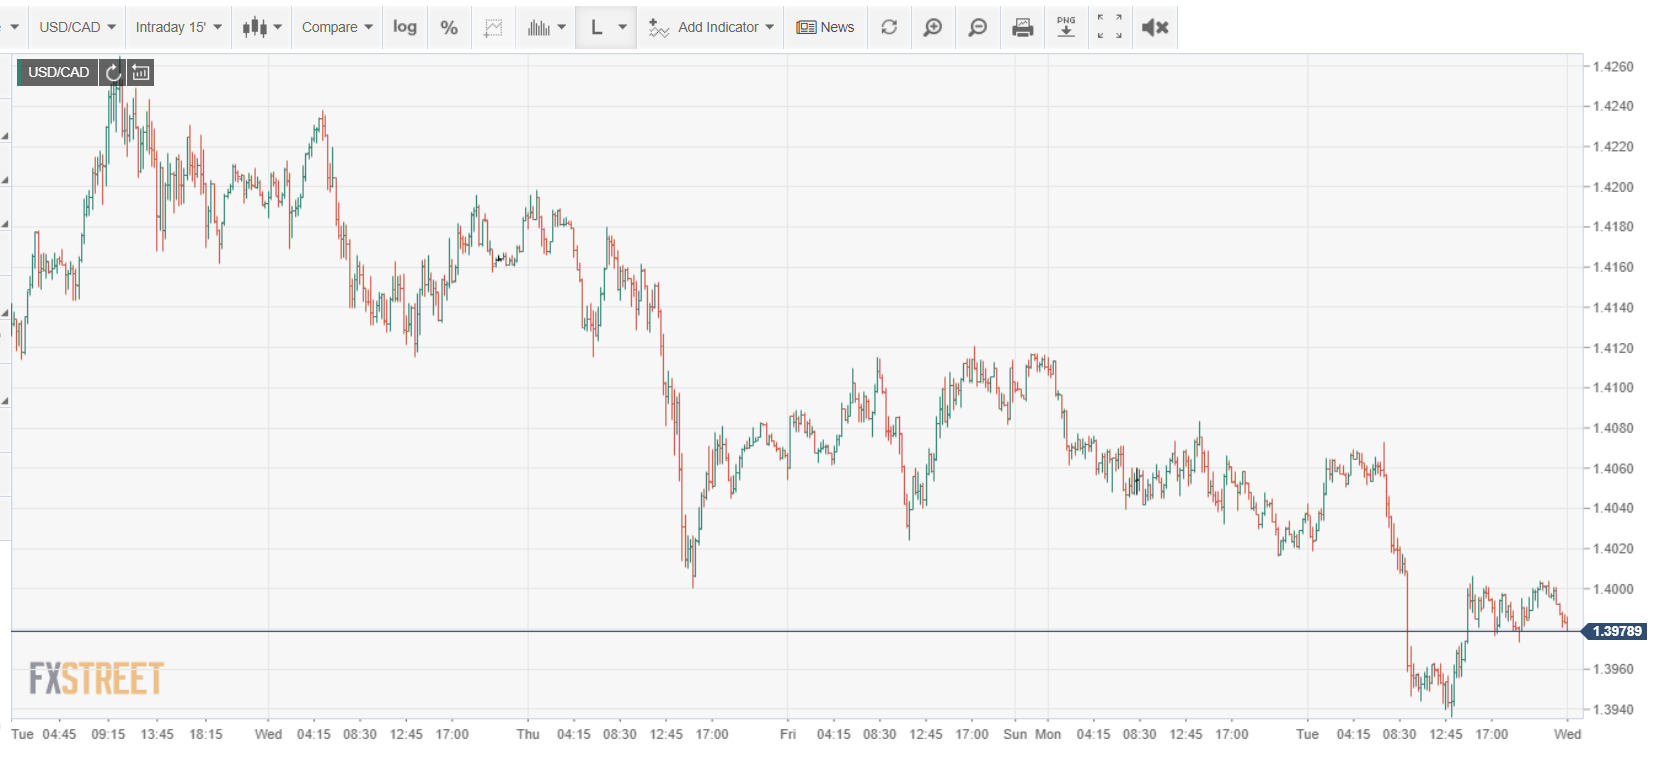 USDCAD Intraday Chart - FX Street - 29 April 2020